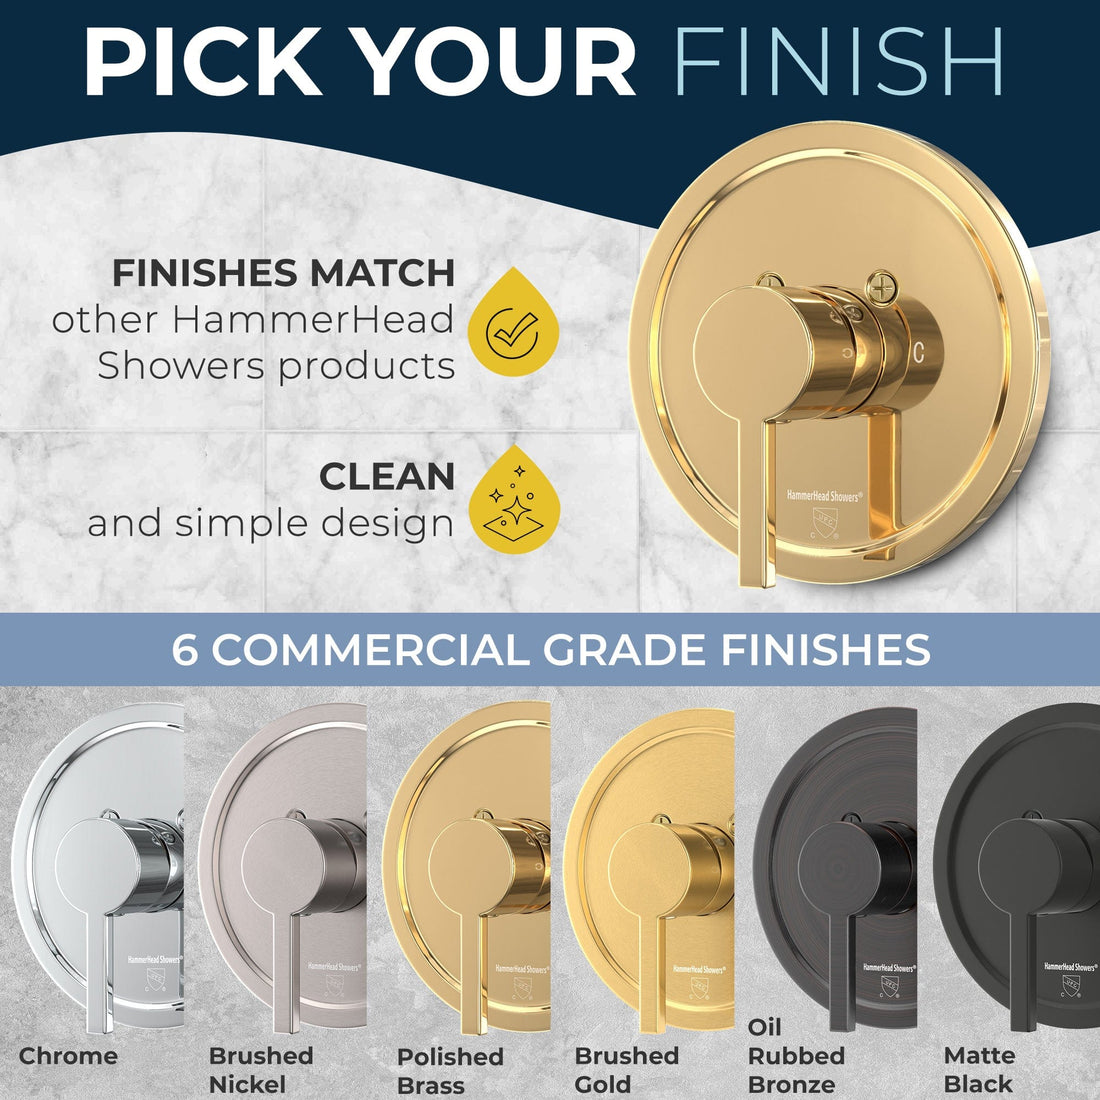 Built to Last with Stainless Steel and Brass cUPC Certified - All Metal 1-Handle Tub and Shower Valve with Trim Kit Polished Brass - The Shower Head Store